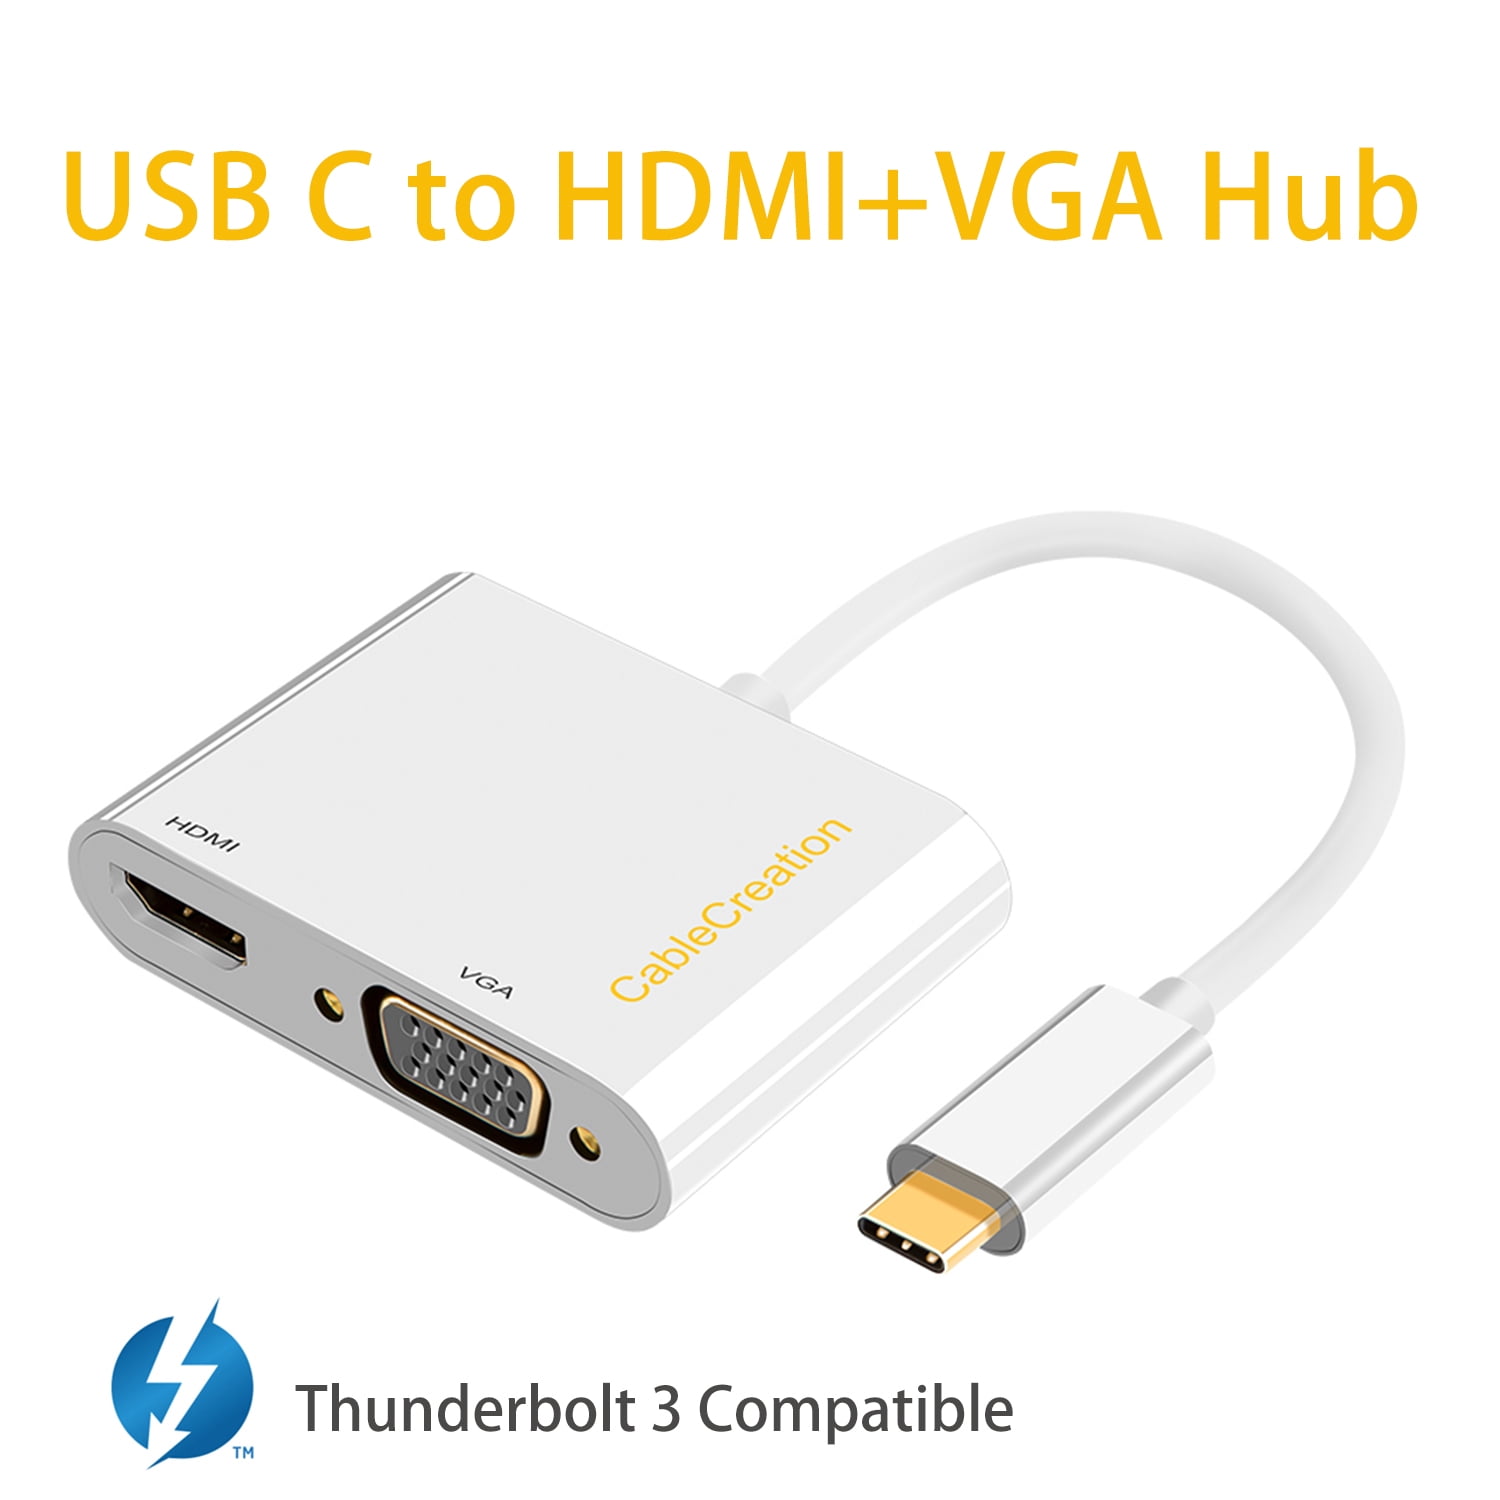 tredobbelt Monica form USB C to HDMI +VGA Adapter, CableCreation Type C to HDMI 4K VGA 1080P  Converter, Compatible with MacBook Pro 2011 and Newer, Chromebook Pixel,  XPS 13,Yoga 910, Surface Go, Galaxy S10 - Walmart.com